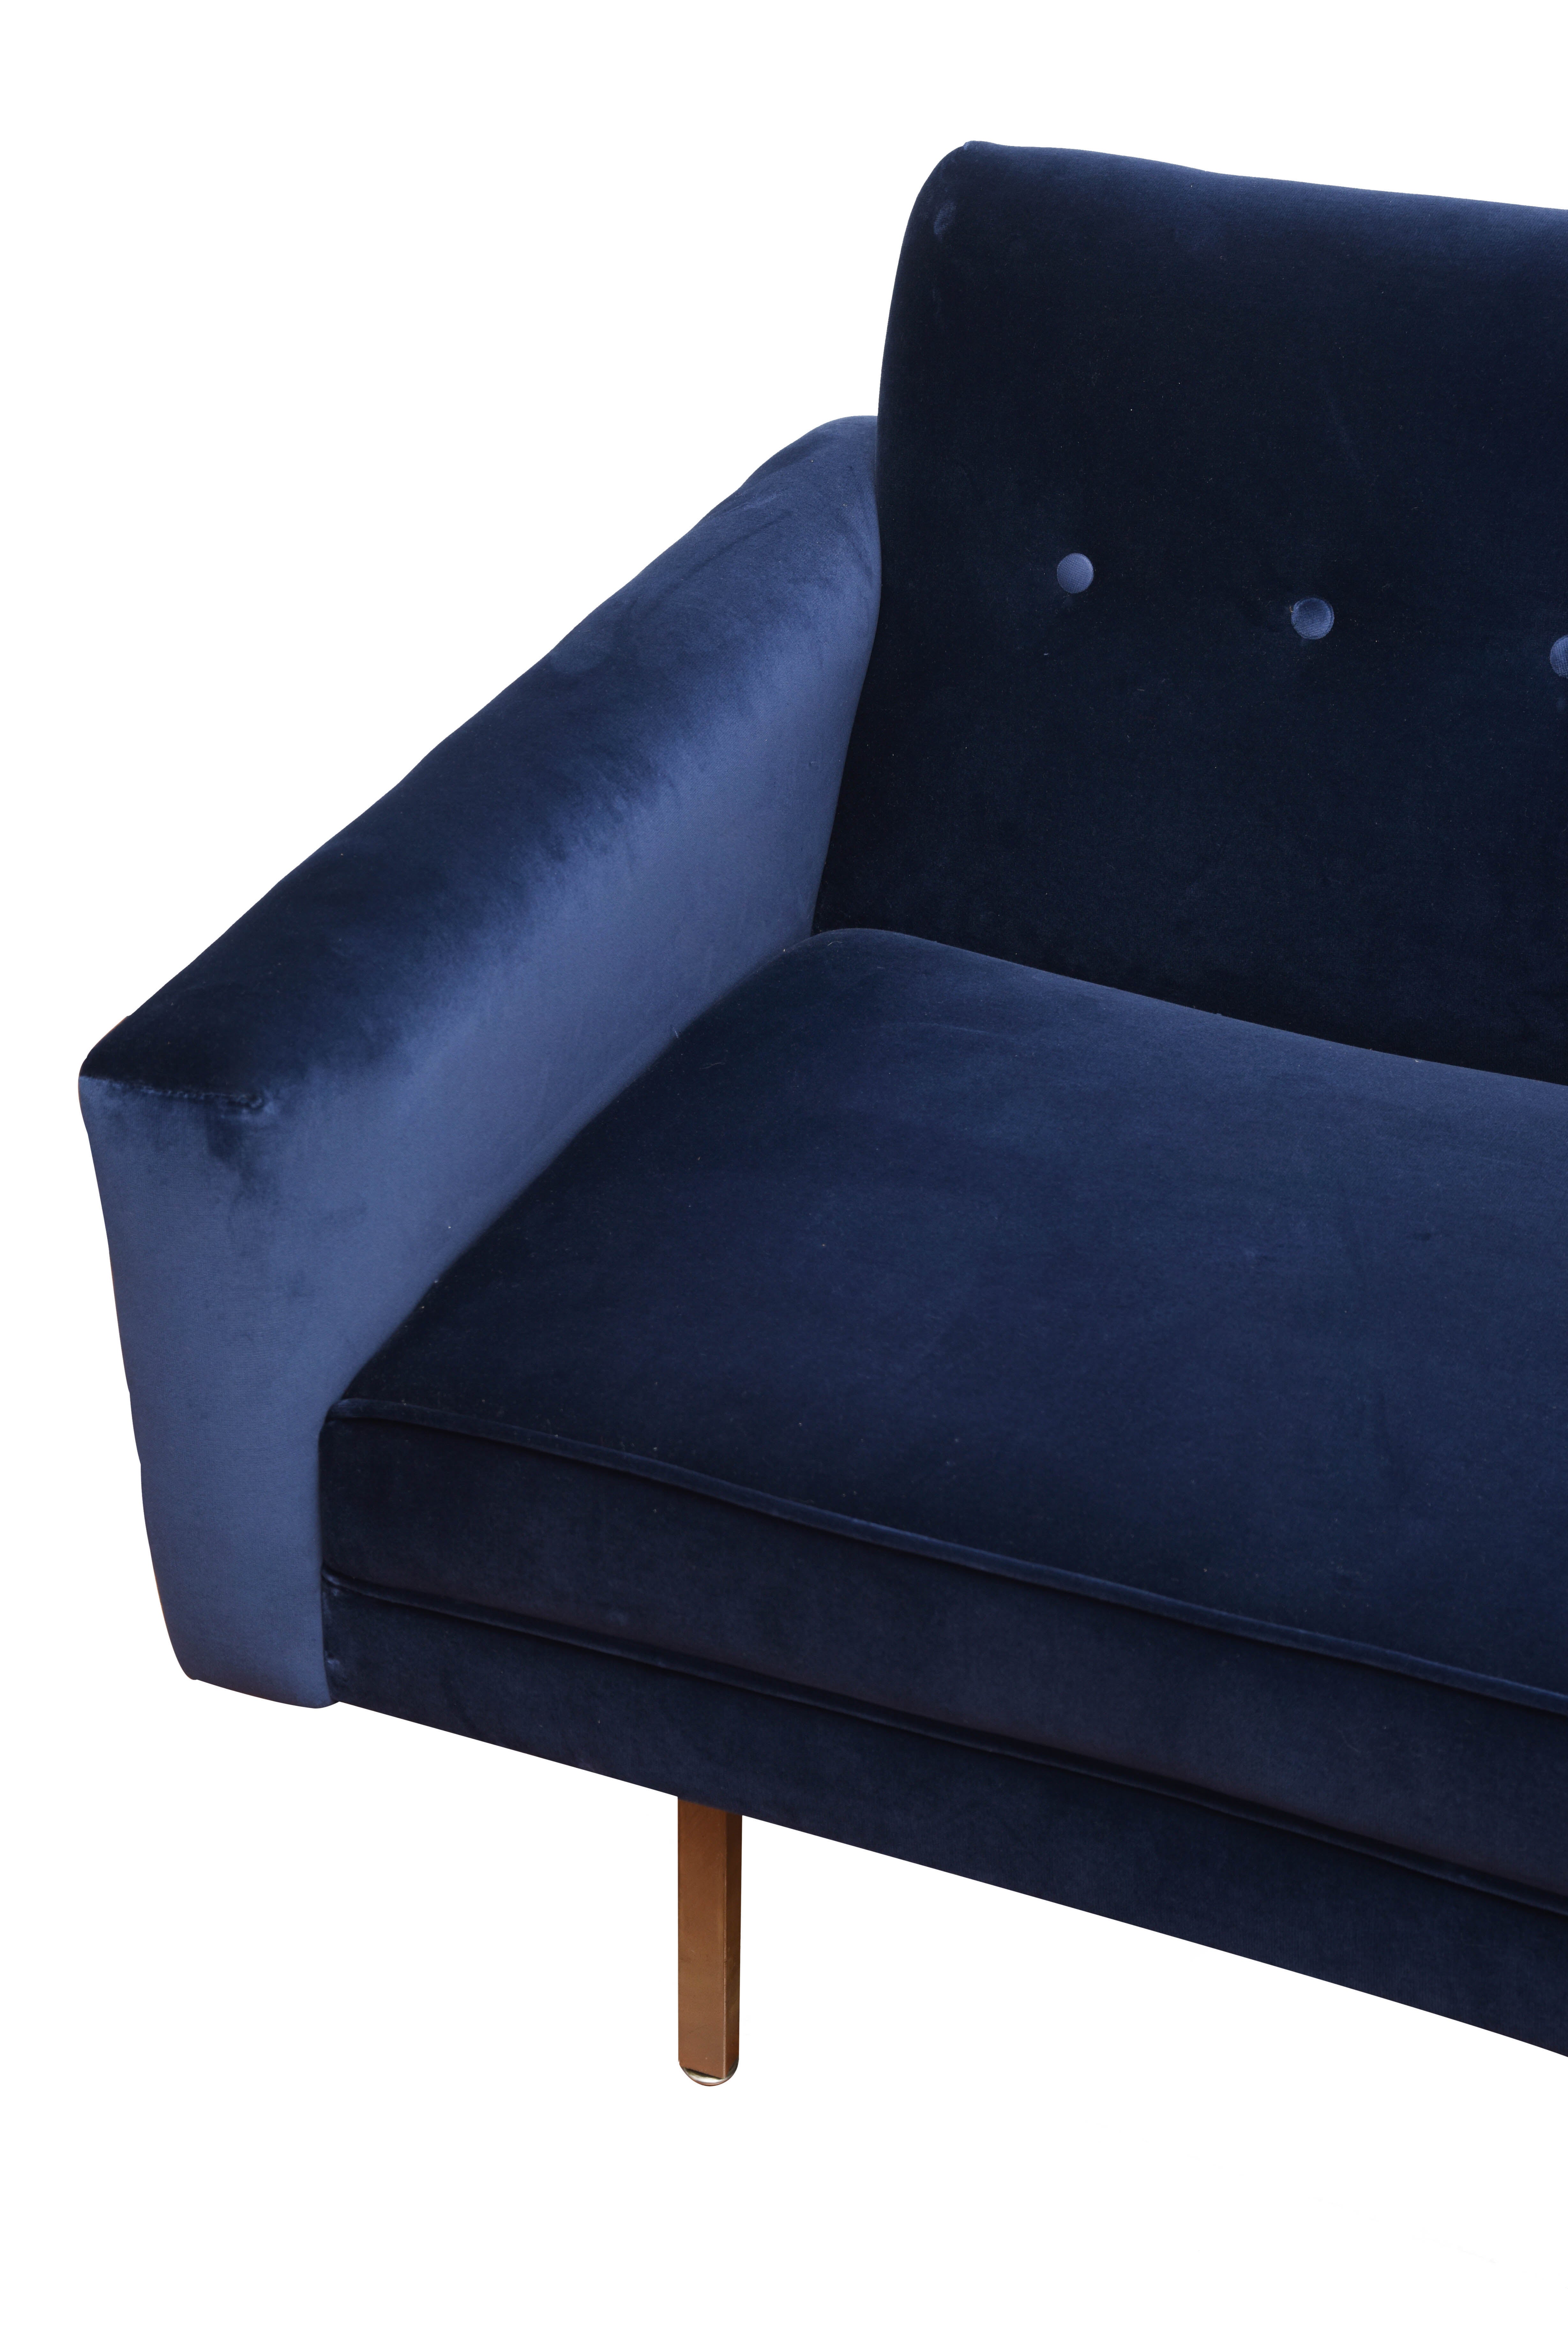 George Nelson, Velvet Sofa In Excellent Condition For Sale In Milan, IT